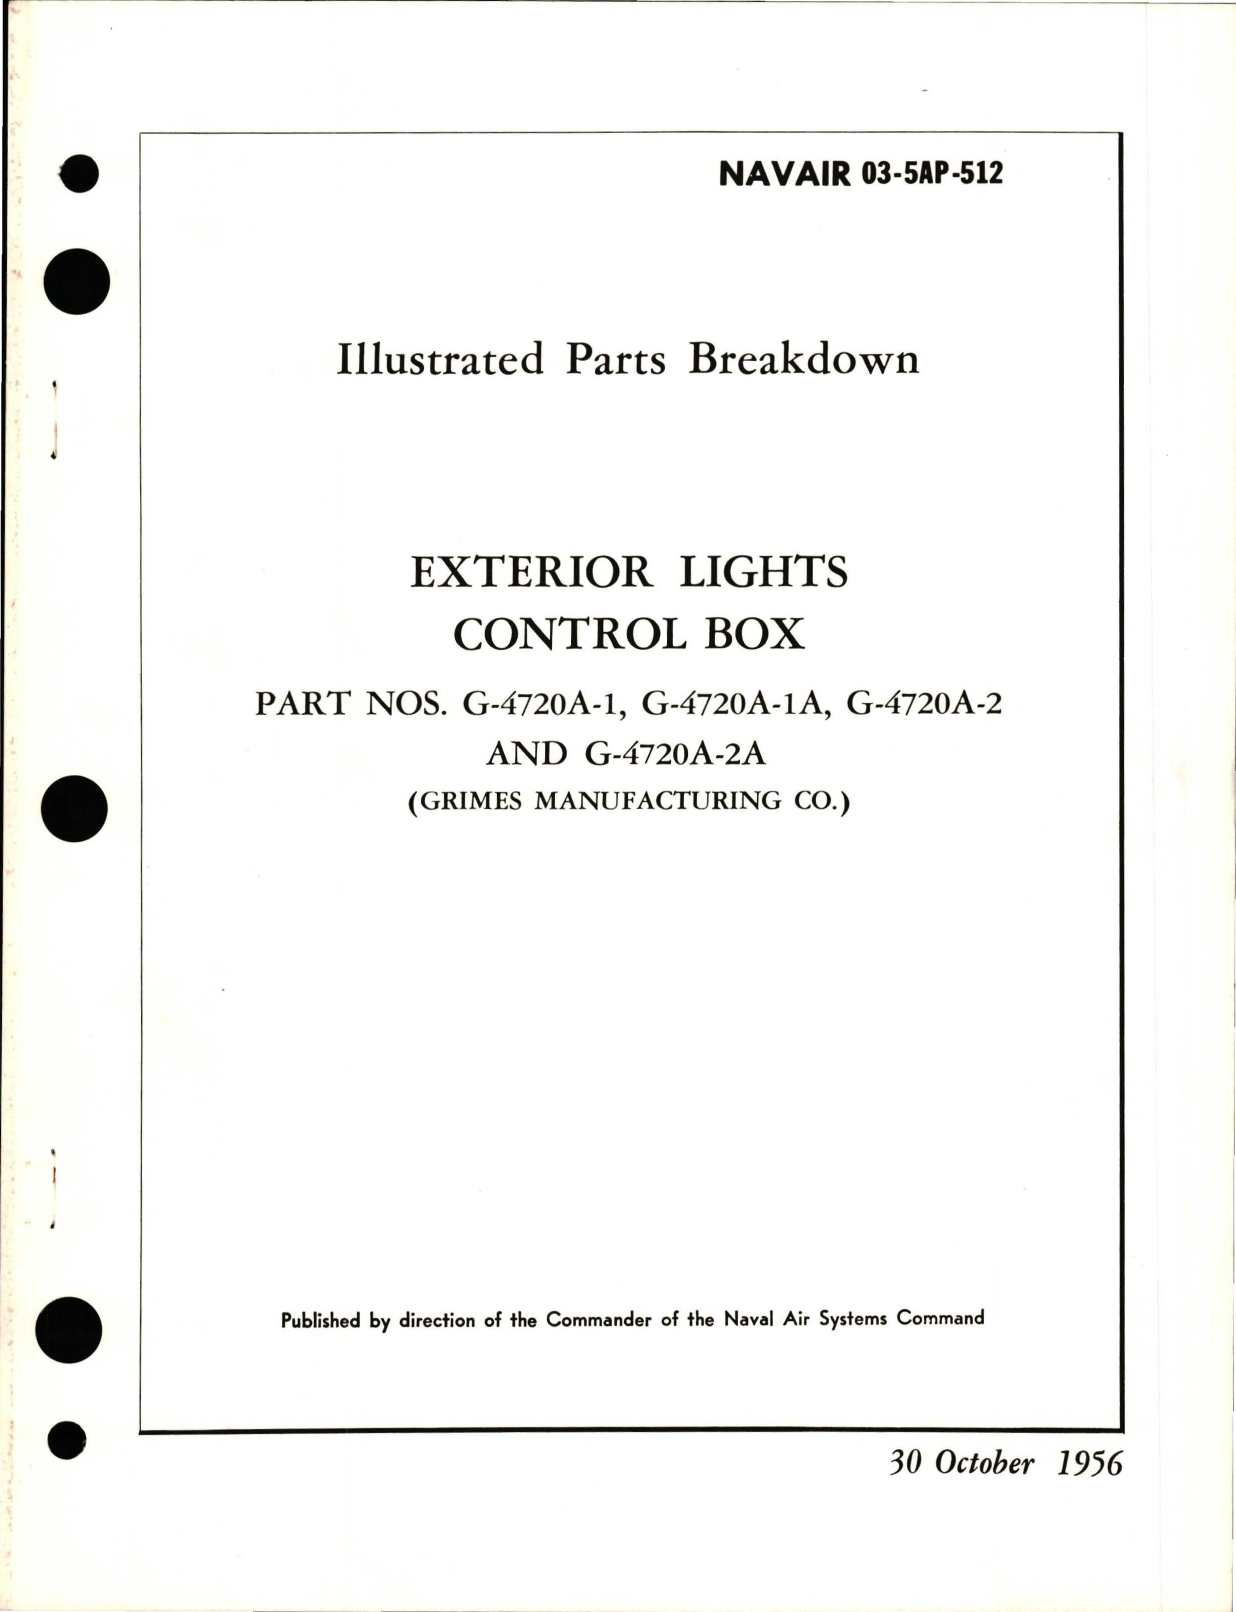 Sample page 1 from AirCorps Library document: Illustrated Parts Breakdown for Exterior Lights Control Box